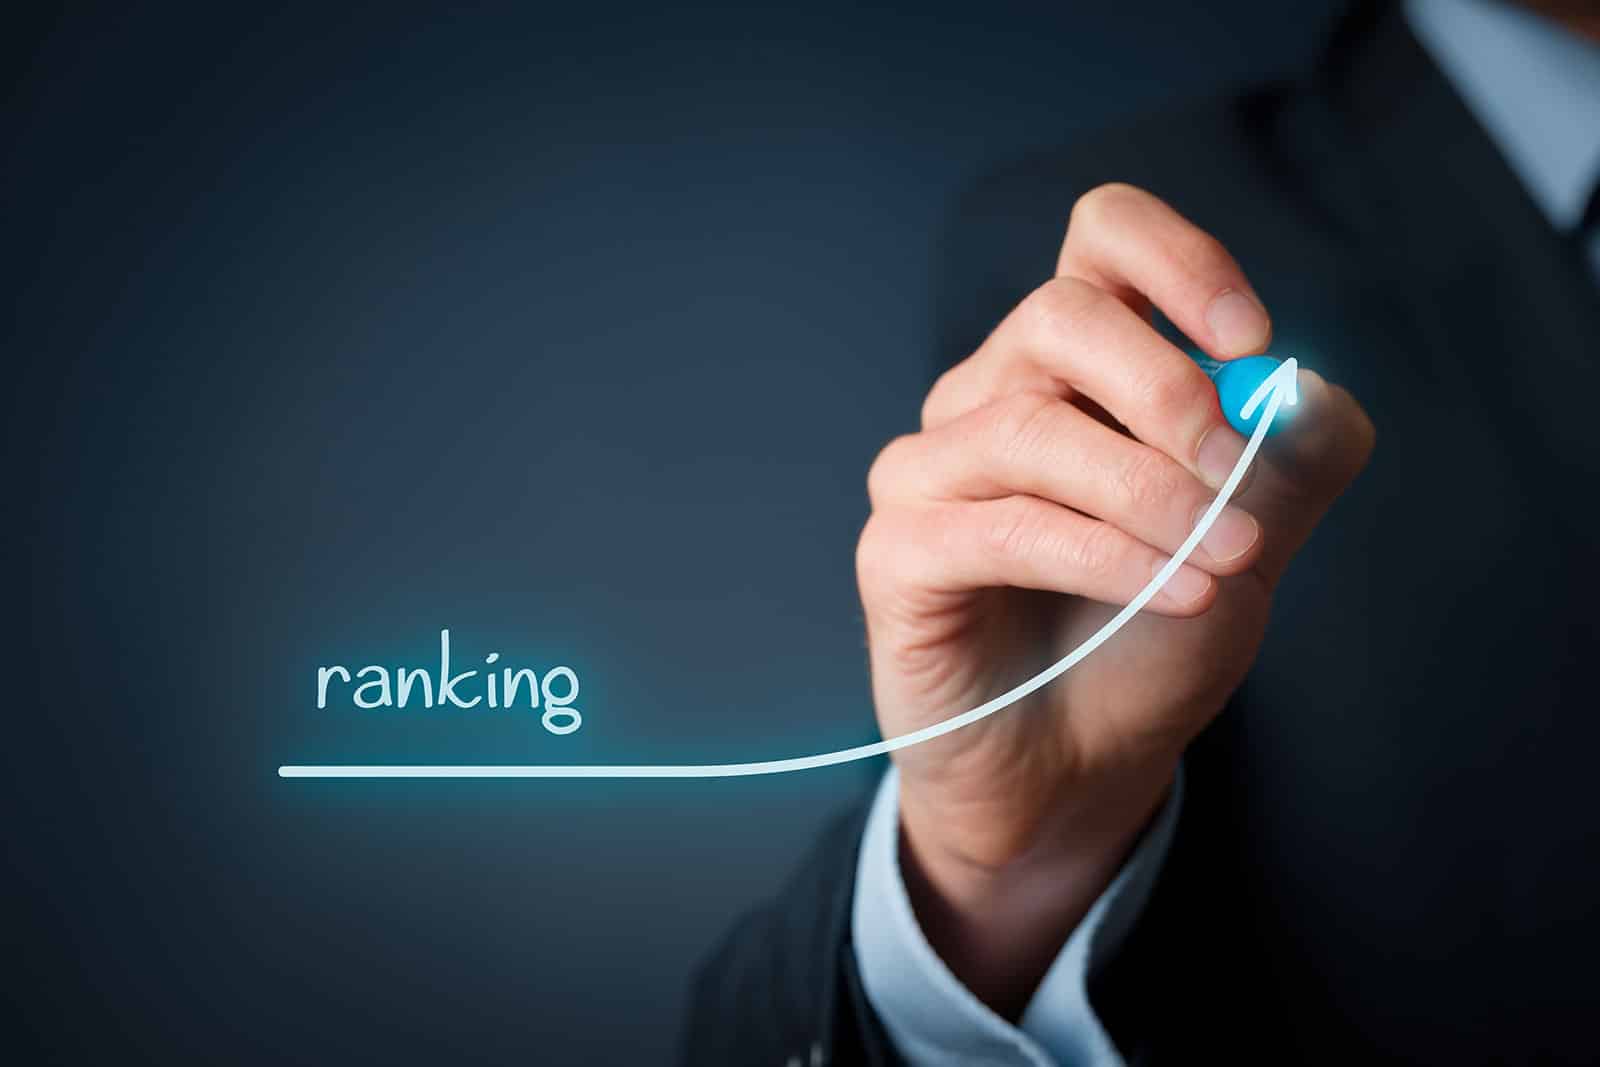 What are the Three Stages of Ranking?